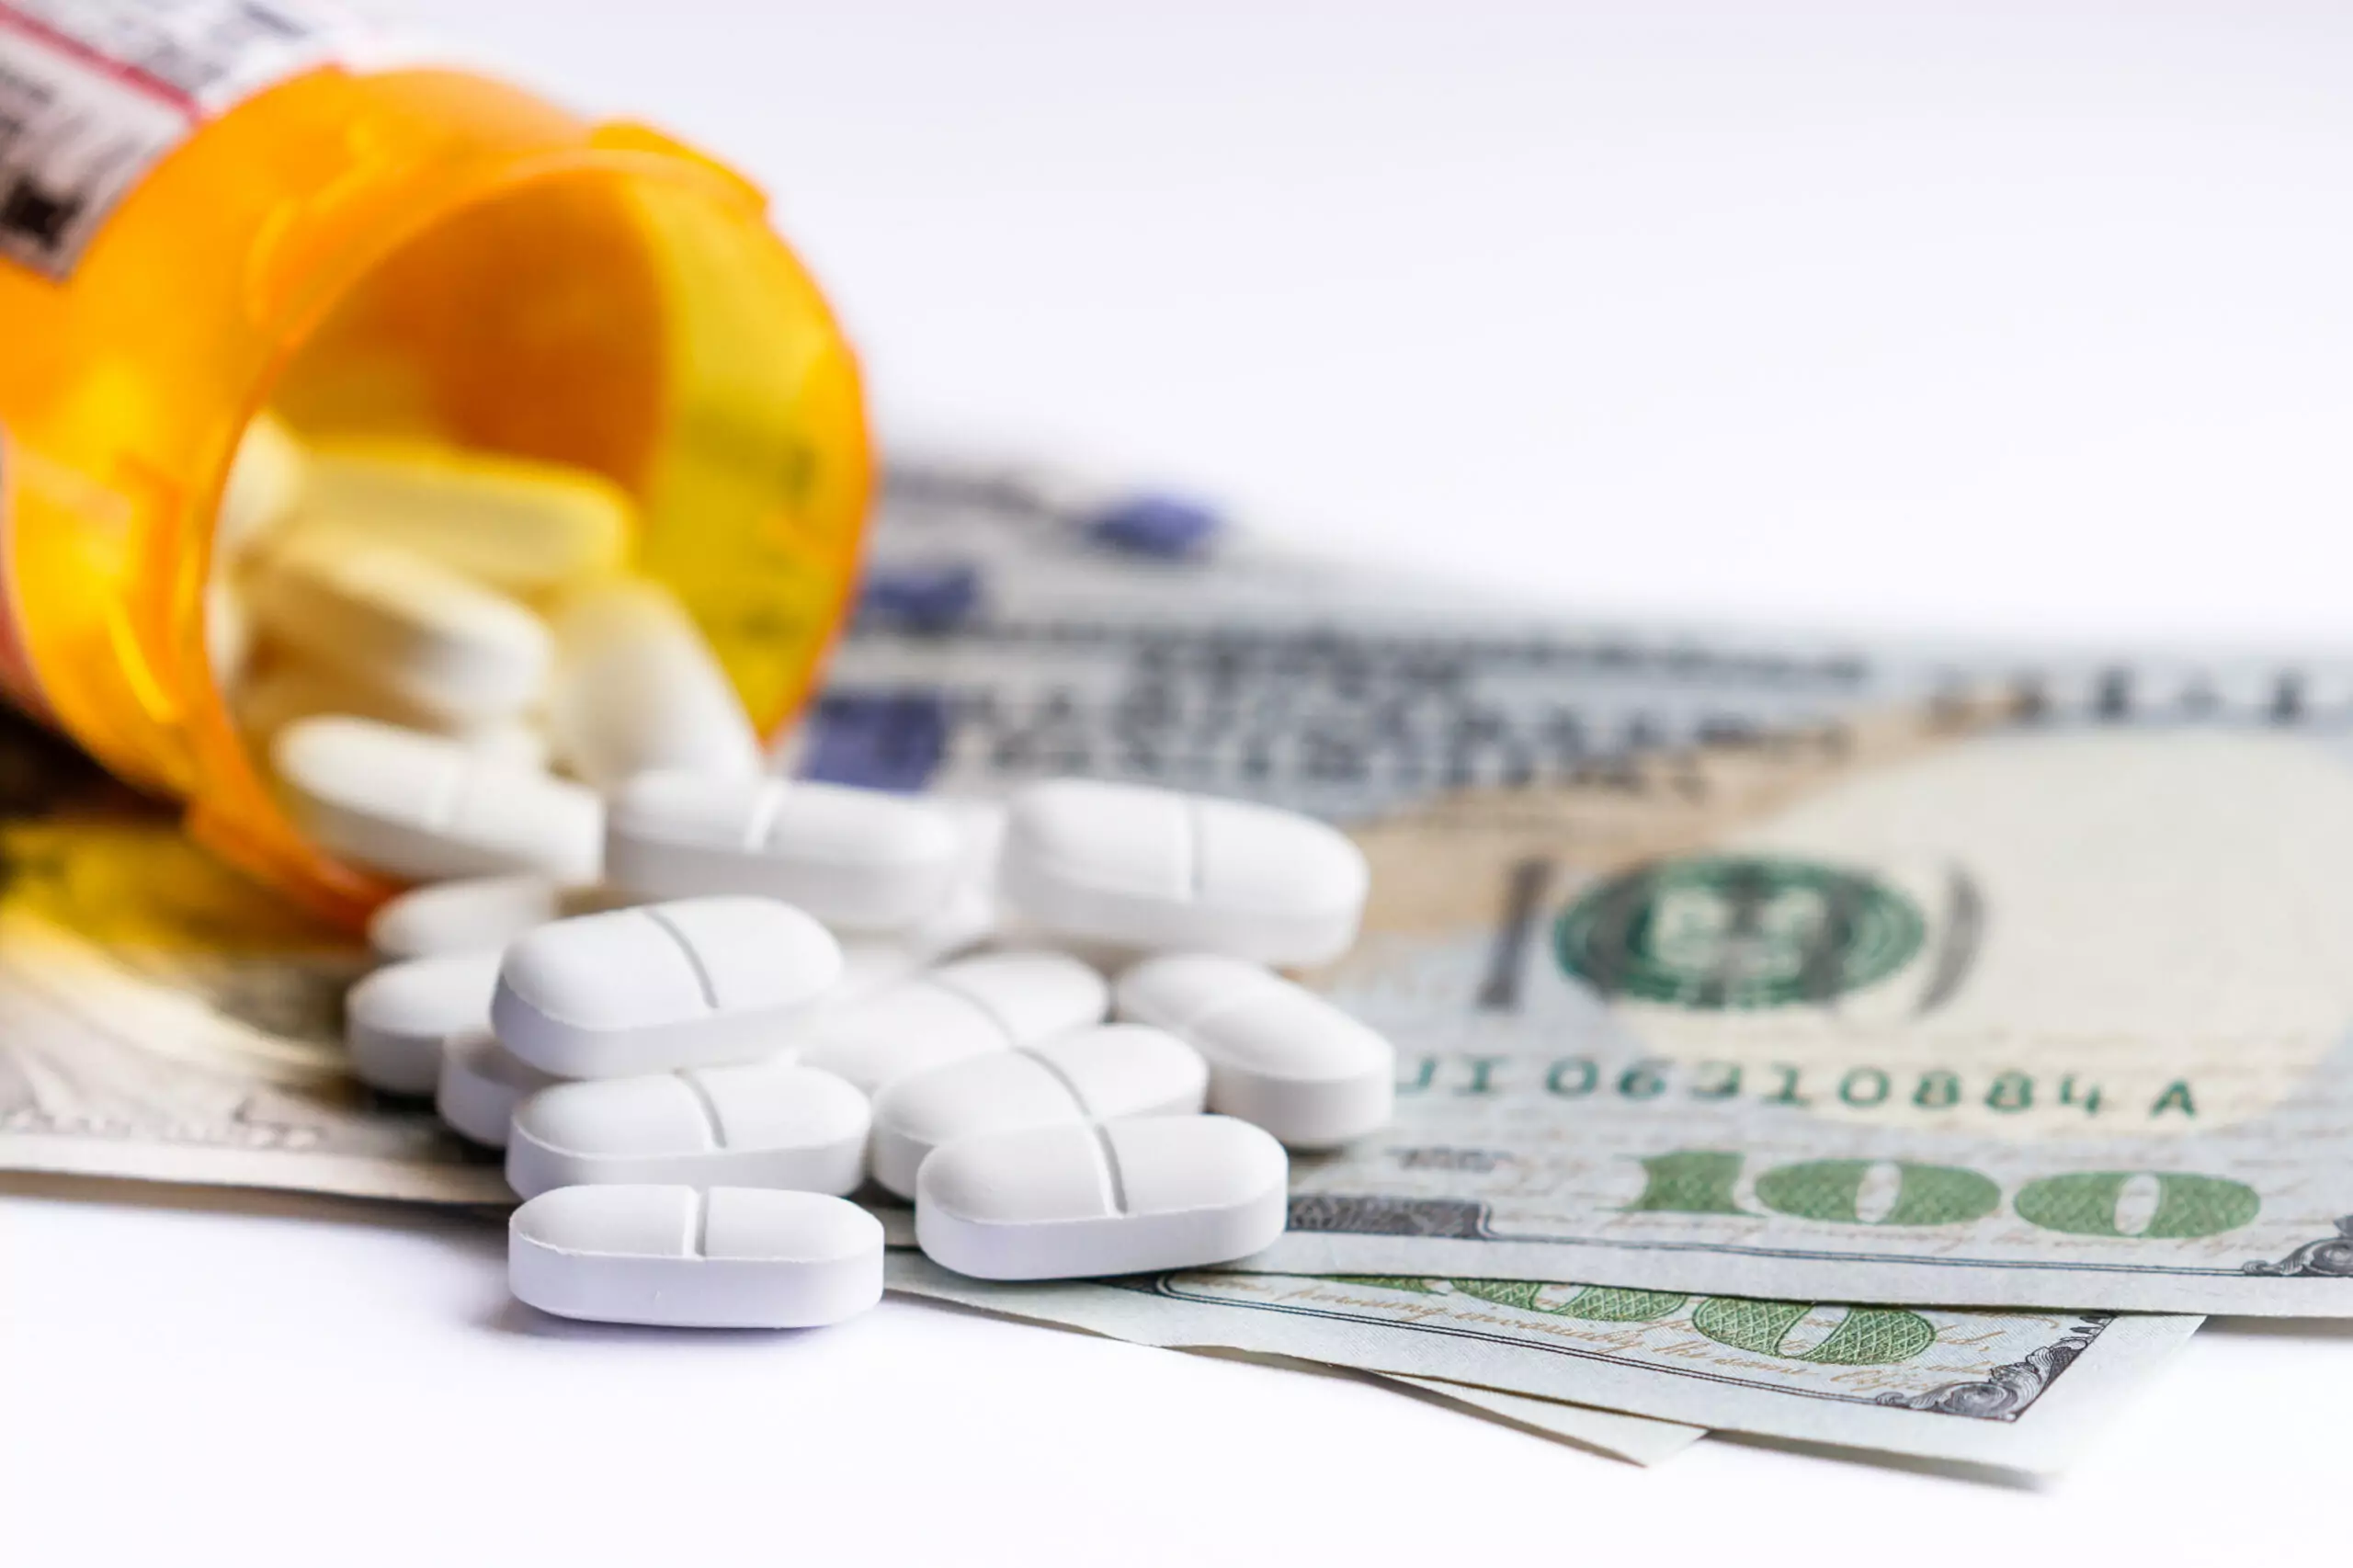 Teva and Allergan settle opioid lawsuit with Kentucky for $114 million